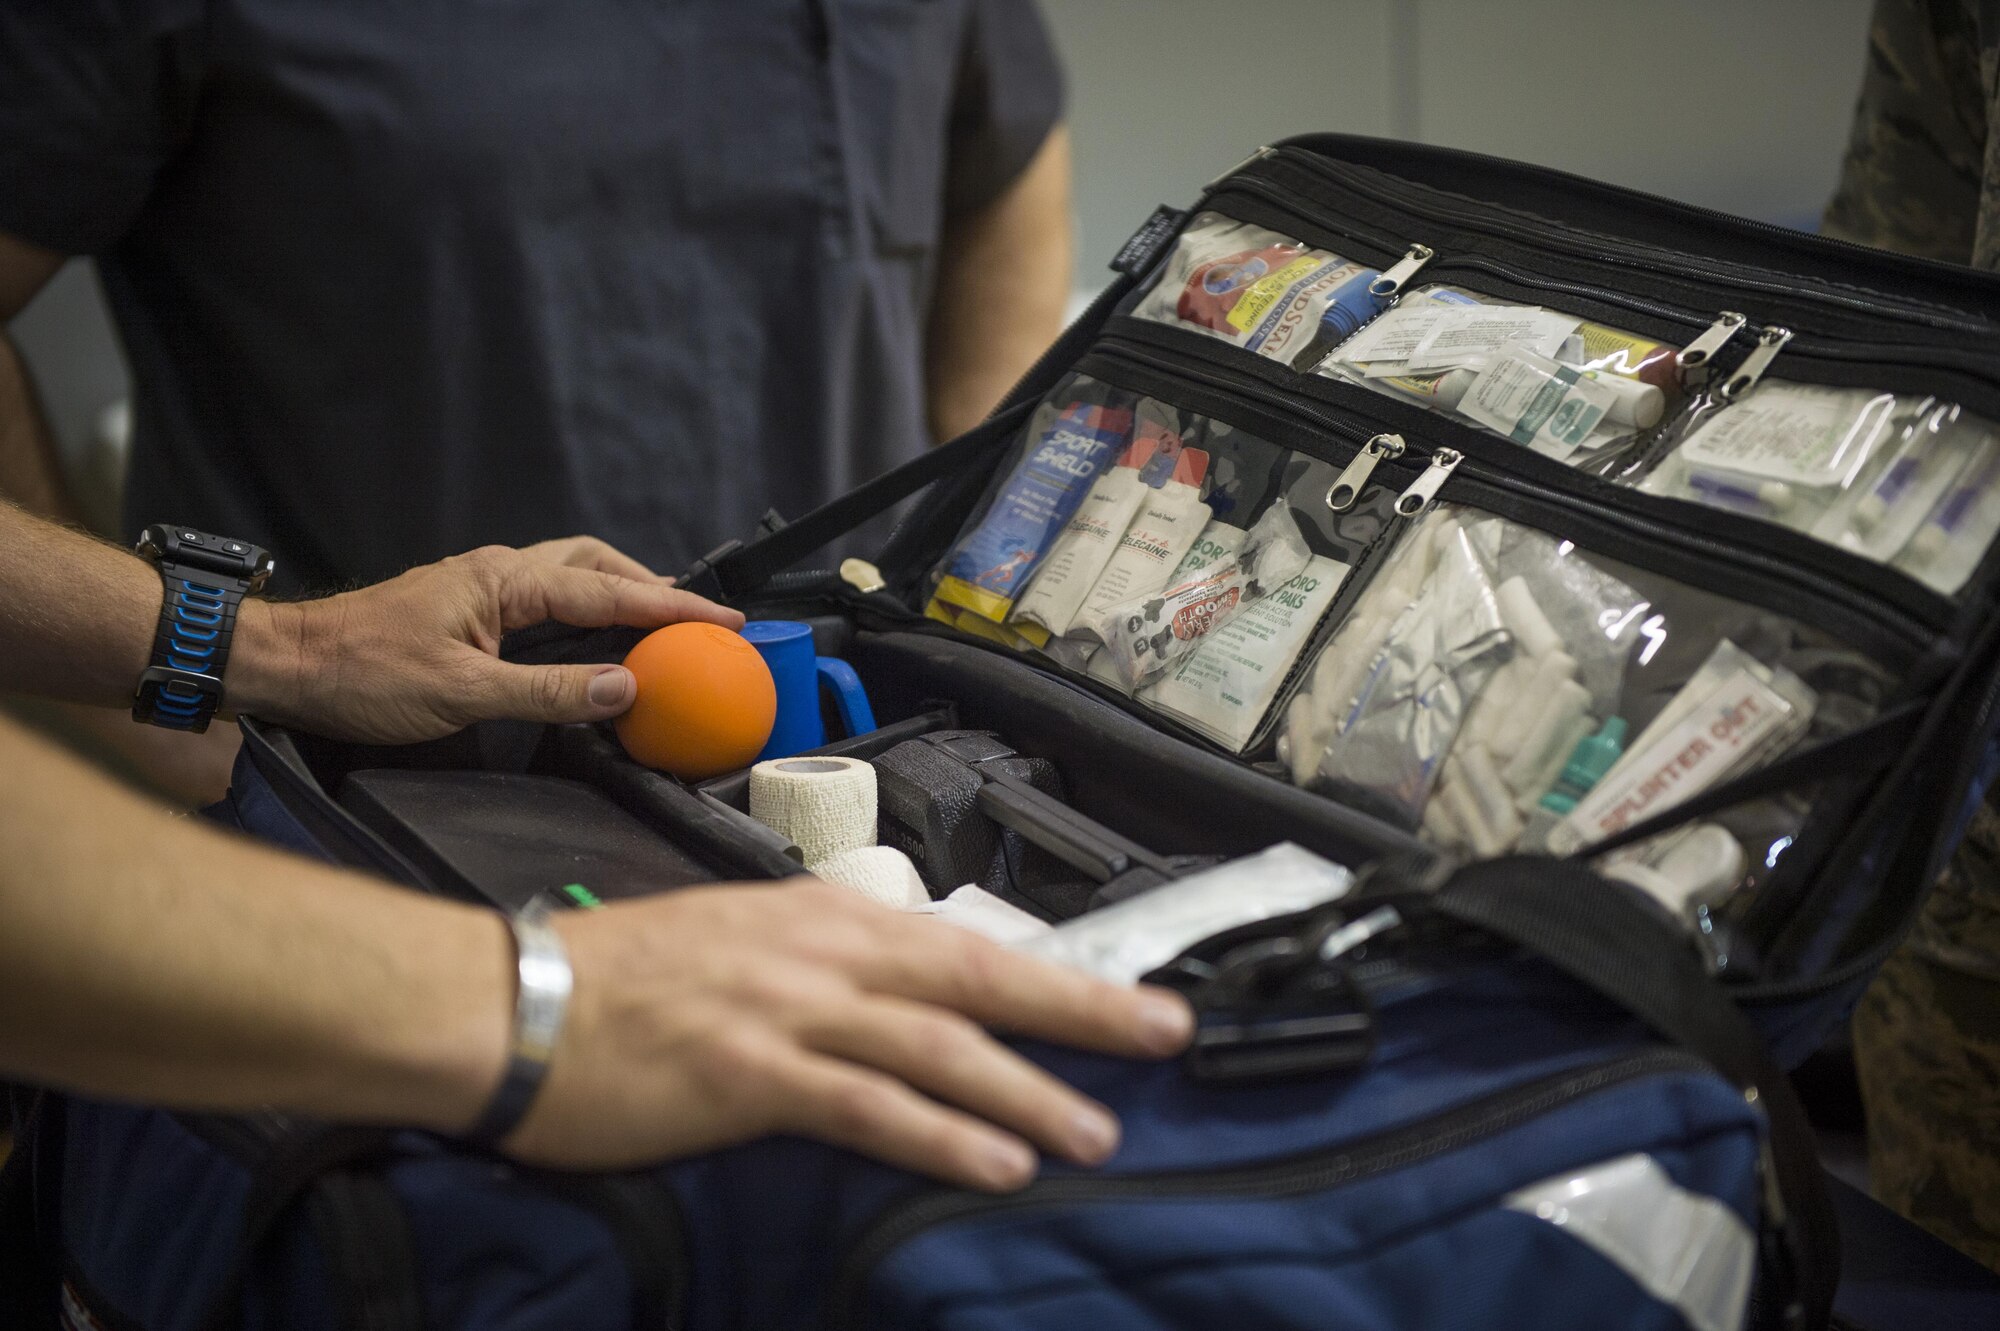 Maj. (Dr.) Sean Martin, the chief of sports medicine with Air Force Special Operations Command Office of the Surgeon General, prepares his medical bag before sitting volleyball practice during a Warrior Games training camp at Hurlburt Field, Fla., April 4, 2016. Martin and other medical technicians provide extra services to the athletes during the training camp to help them spend more time in the competition and off the sidelines. (U.S. Air Force photo by Staff Sgt. Marleah Miller)